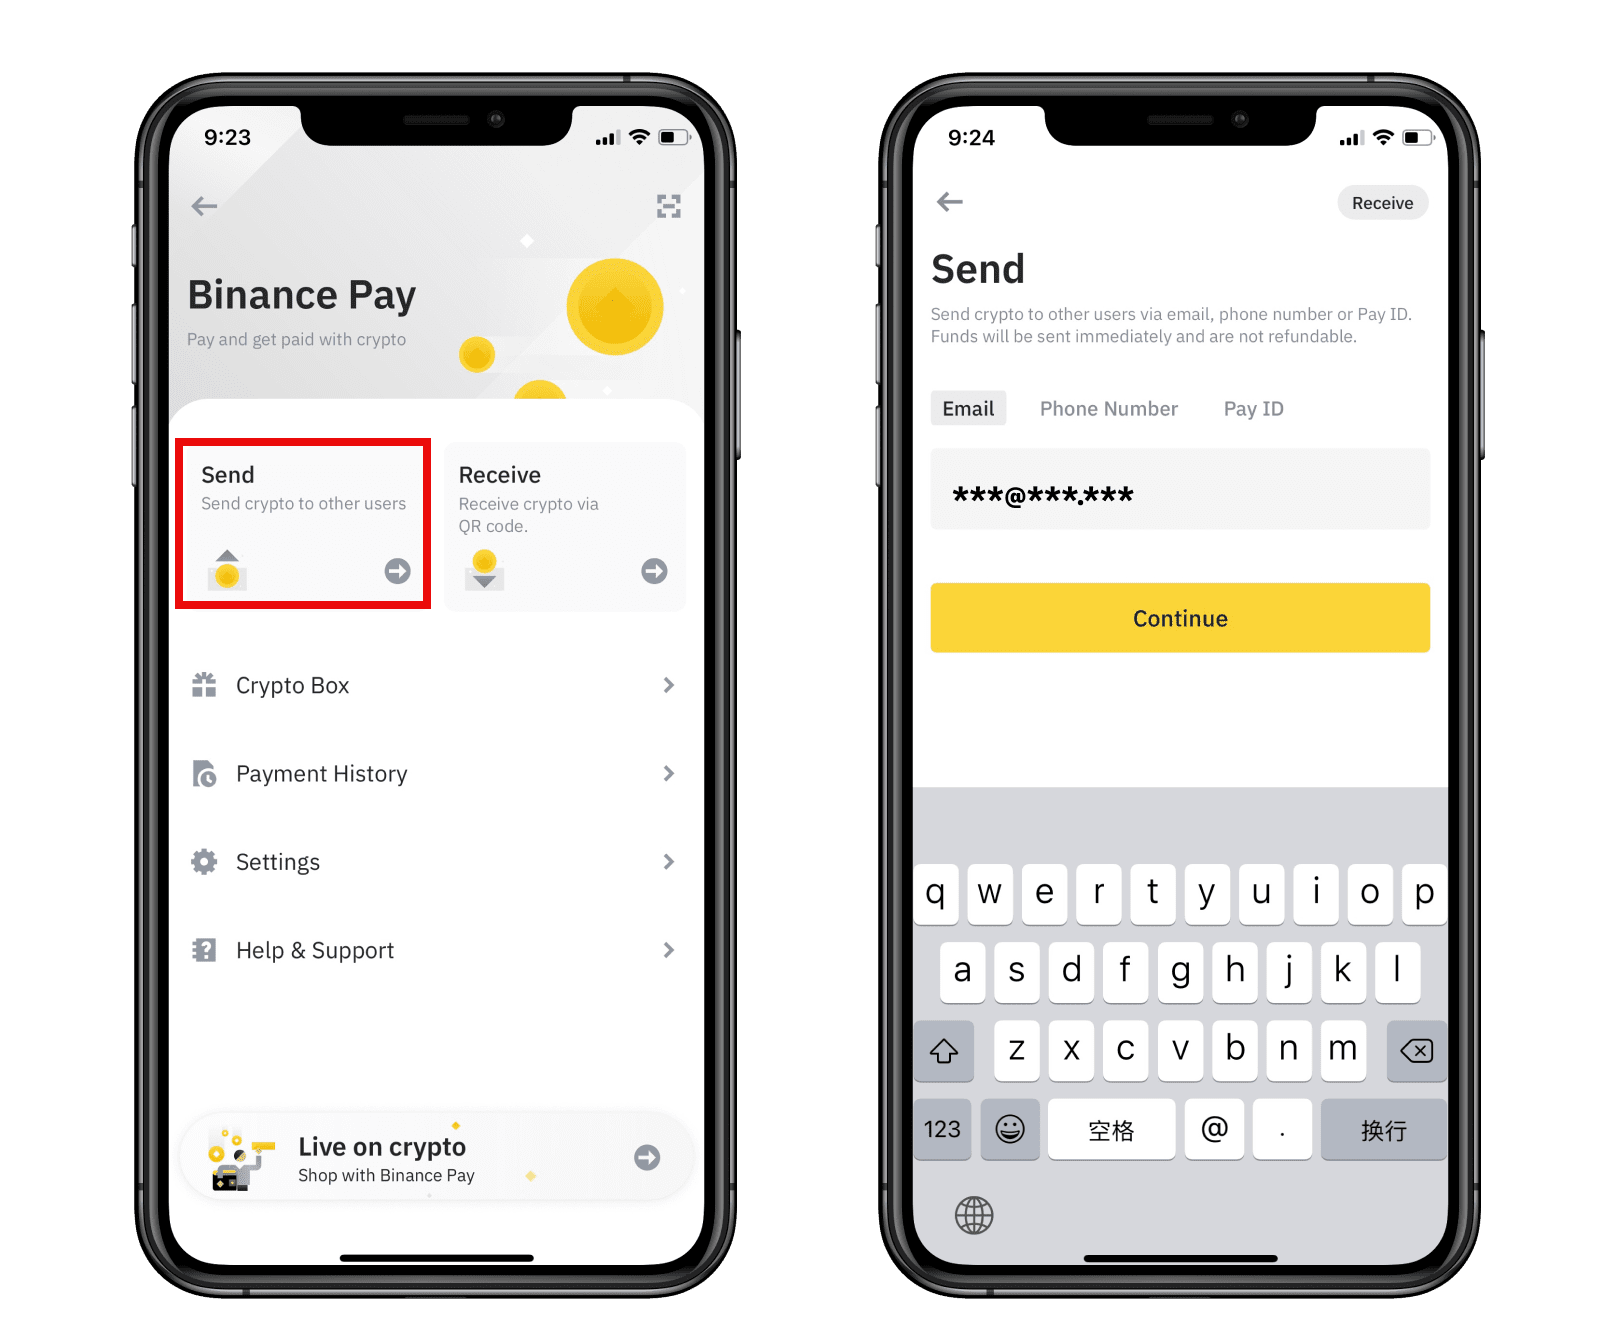 How to Transfer from Cash App to Binance in Easy Steps